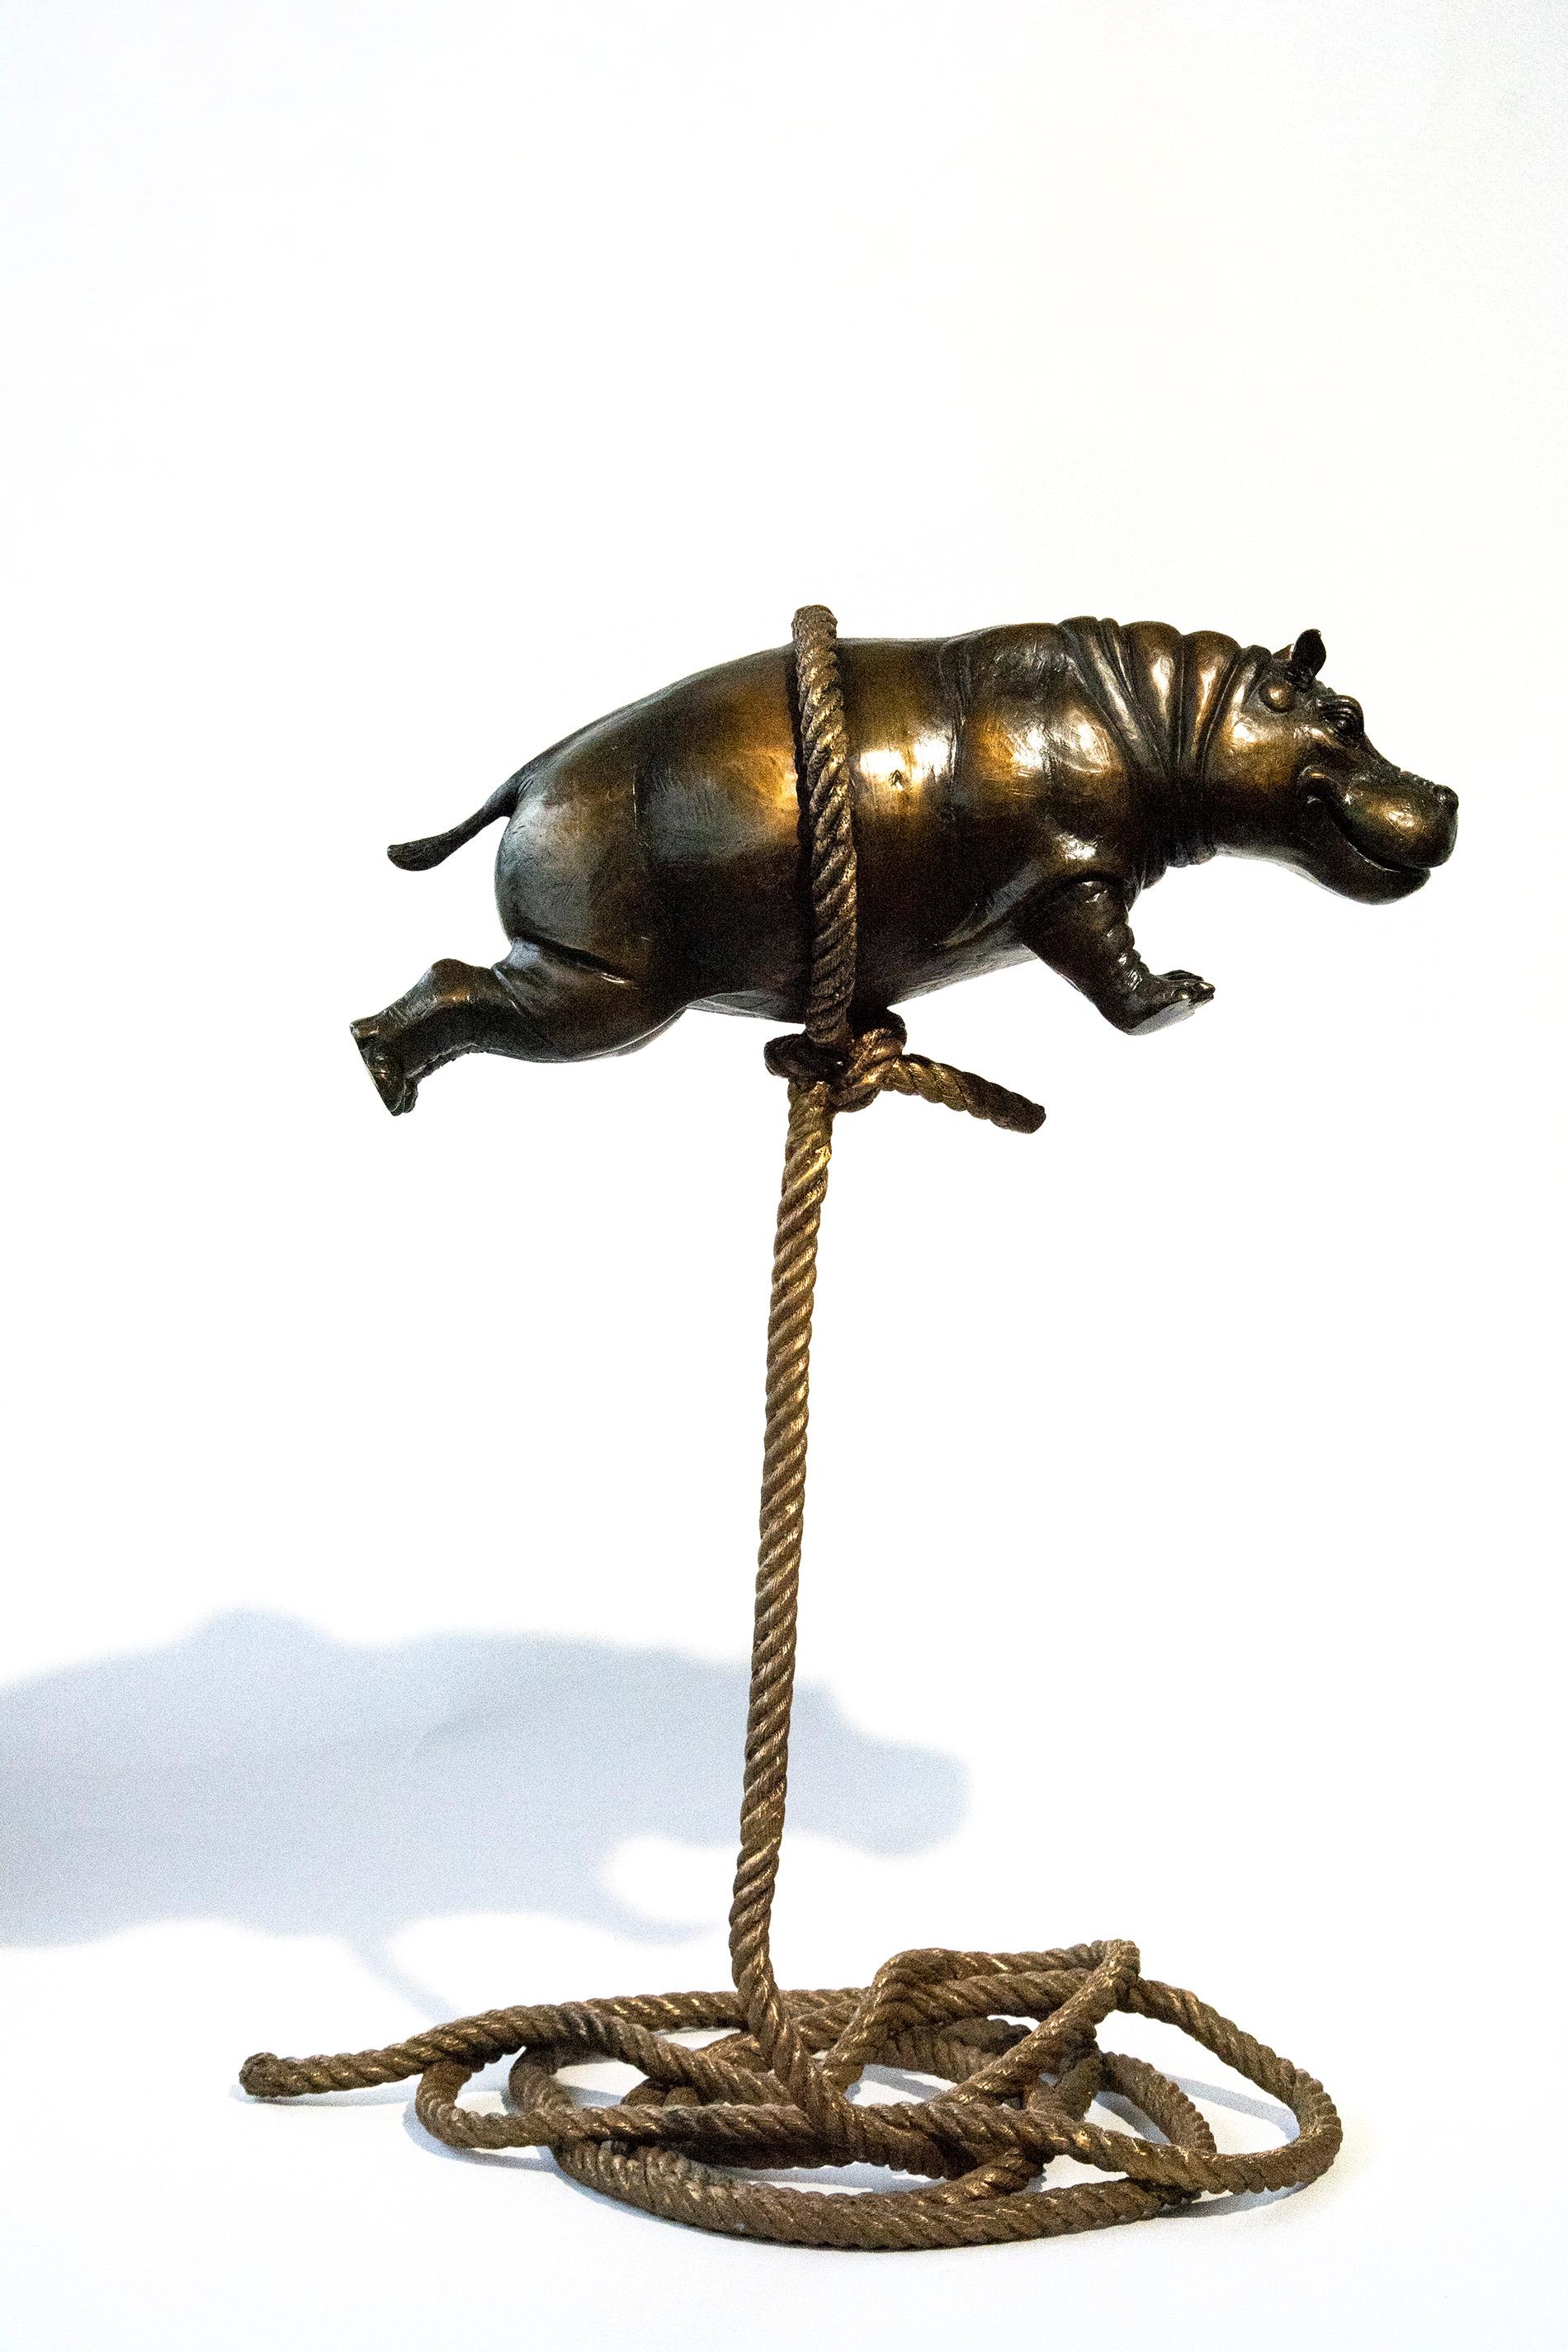 Gillie and Marc Schattner Figurative Sculpture - Flying hippo on short rope, AP